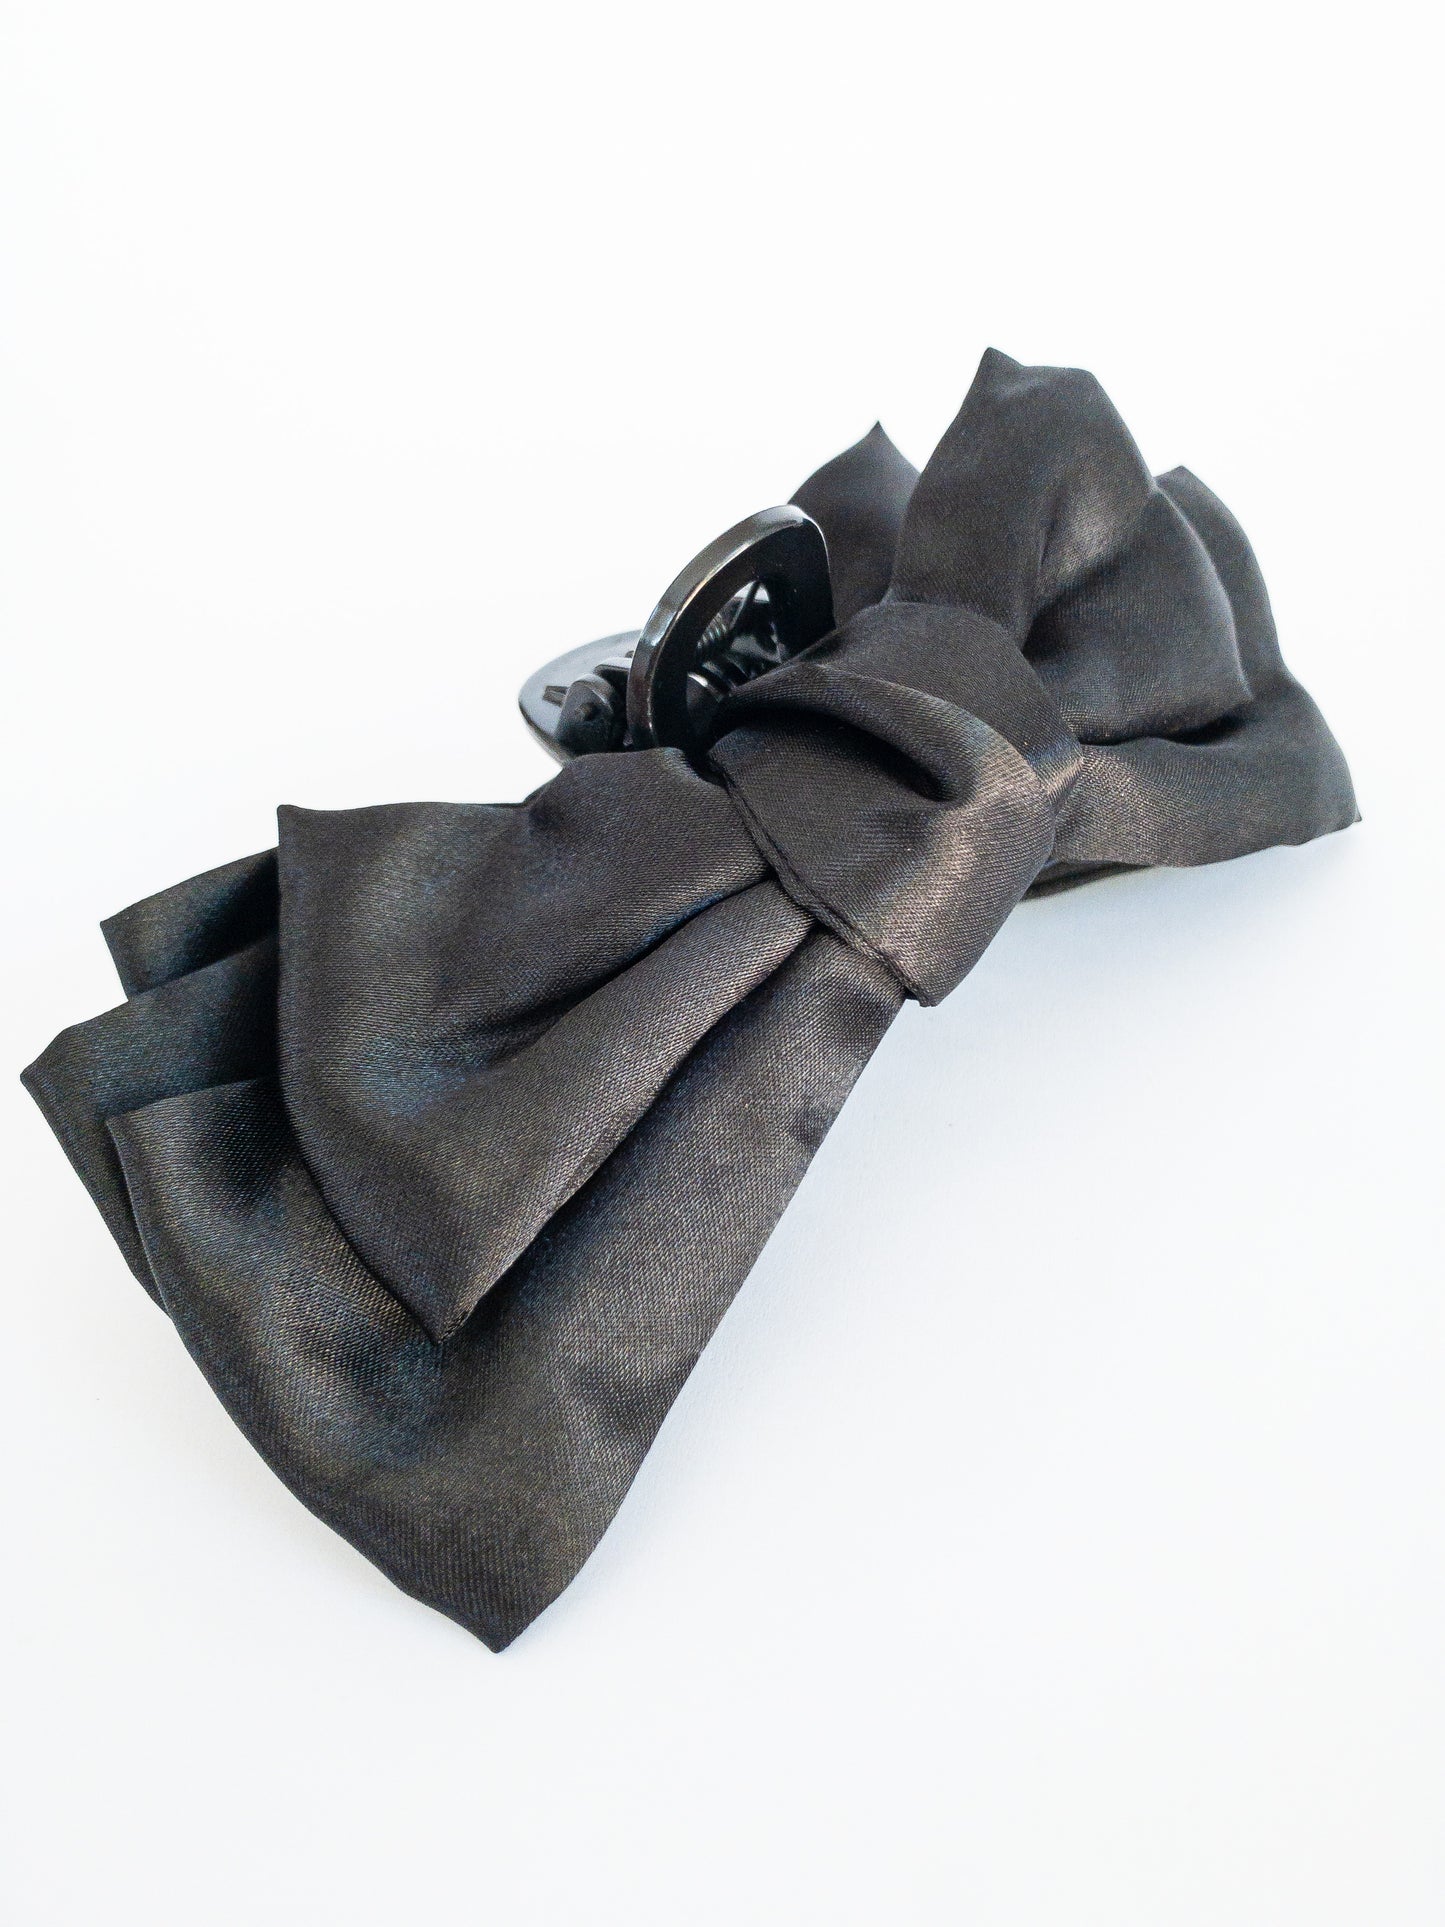 Put a bow on you, you're a gift!  This jumbo bow hair claw in a satin jet black is for those girly days. When you want to frame your face with little wispy bangs and secure it with a pretty and classic bow.